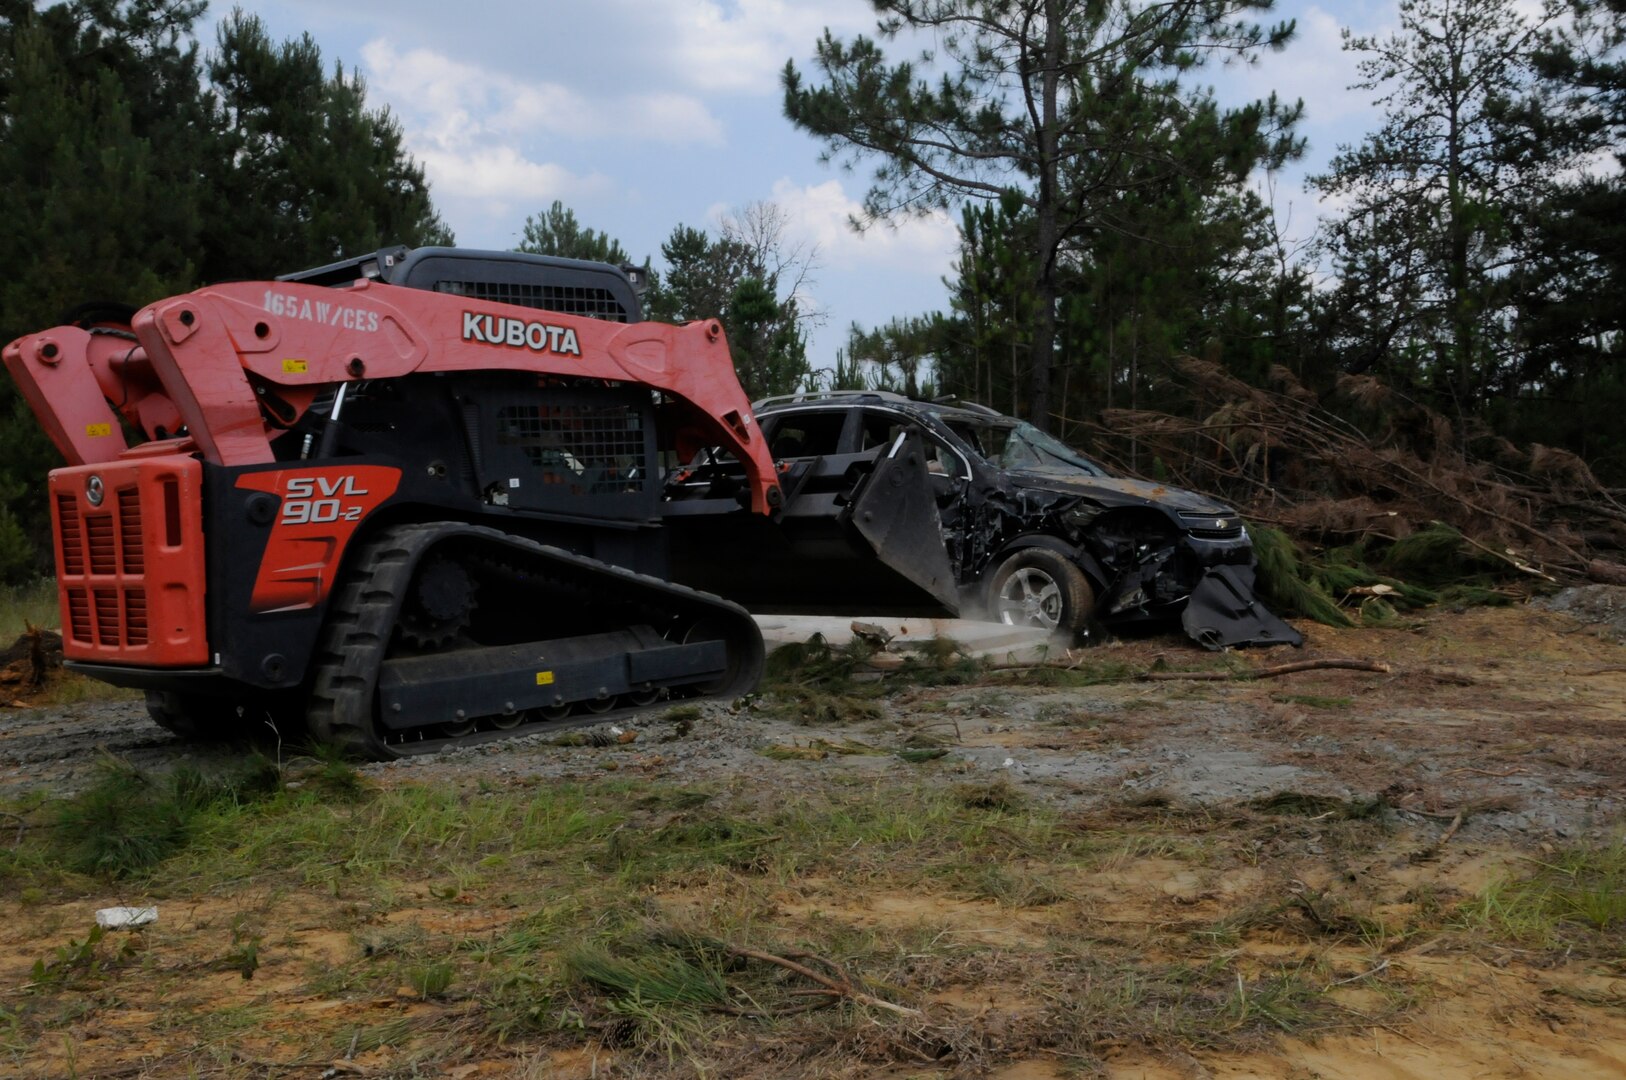 Civil engineer team members participate in a route clearing exercise simulating an after effect of a tornado during Exercise Global Dragon 2019 at the Guardian Centers of Georgia, held in Perry, Ga., May 29, 2019. Global Dragon is a biannual, Air National Guard led joint training exercise focusing on career fields across the Mission Support enterprise in as close to real-world conditions as possible.